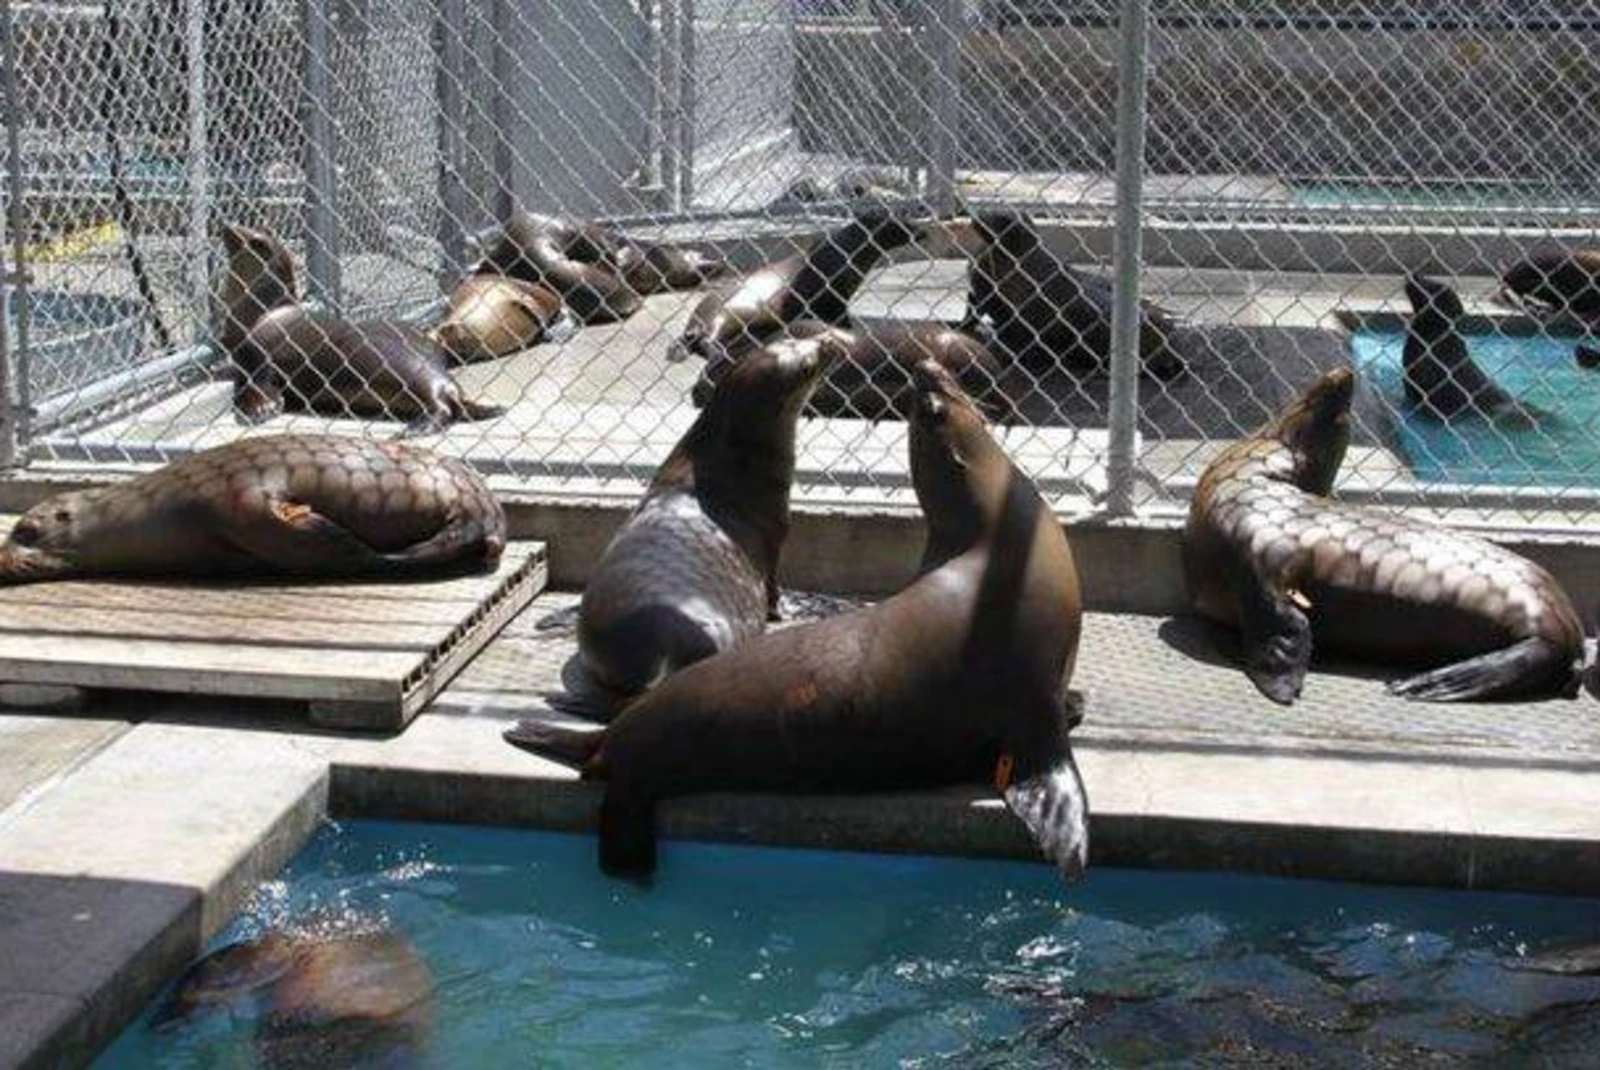 Pacific Marine Mammal Center is a rescue center for sea lions & seals, with pre-booked educational tours & a butterfly garden.